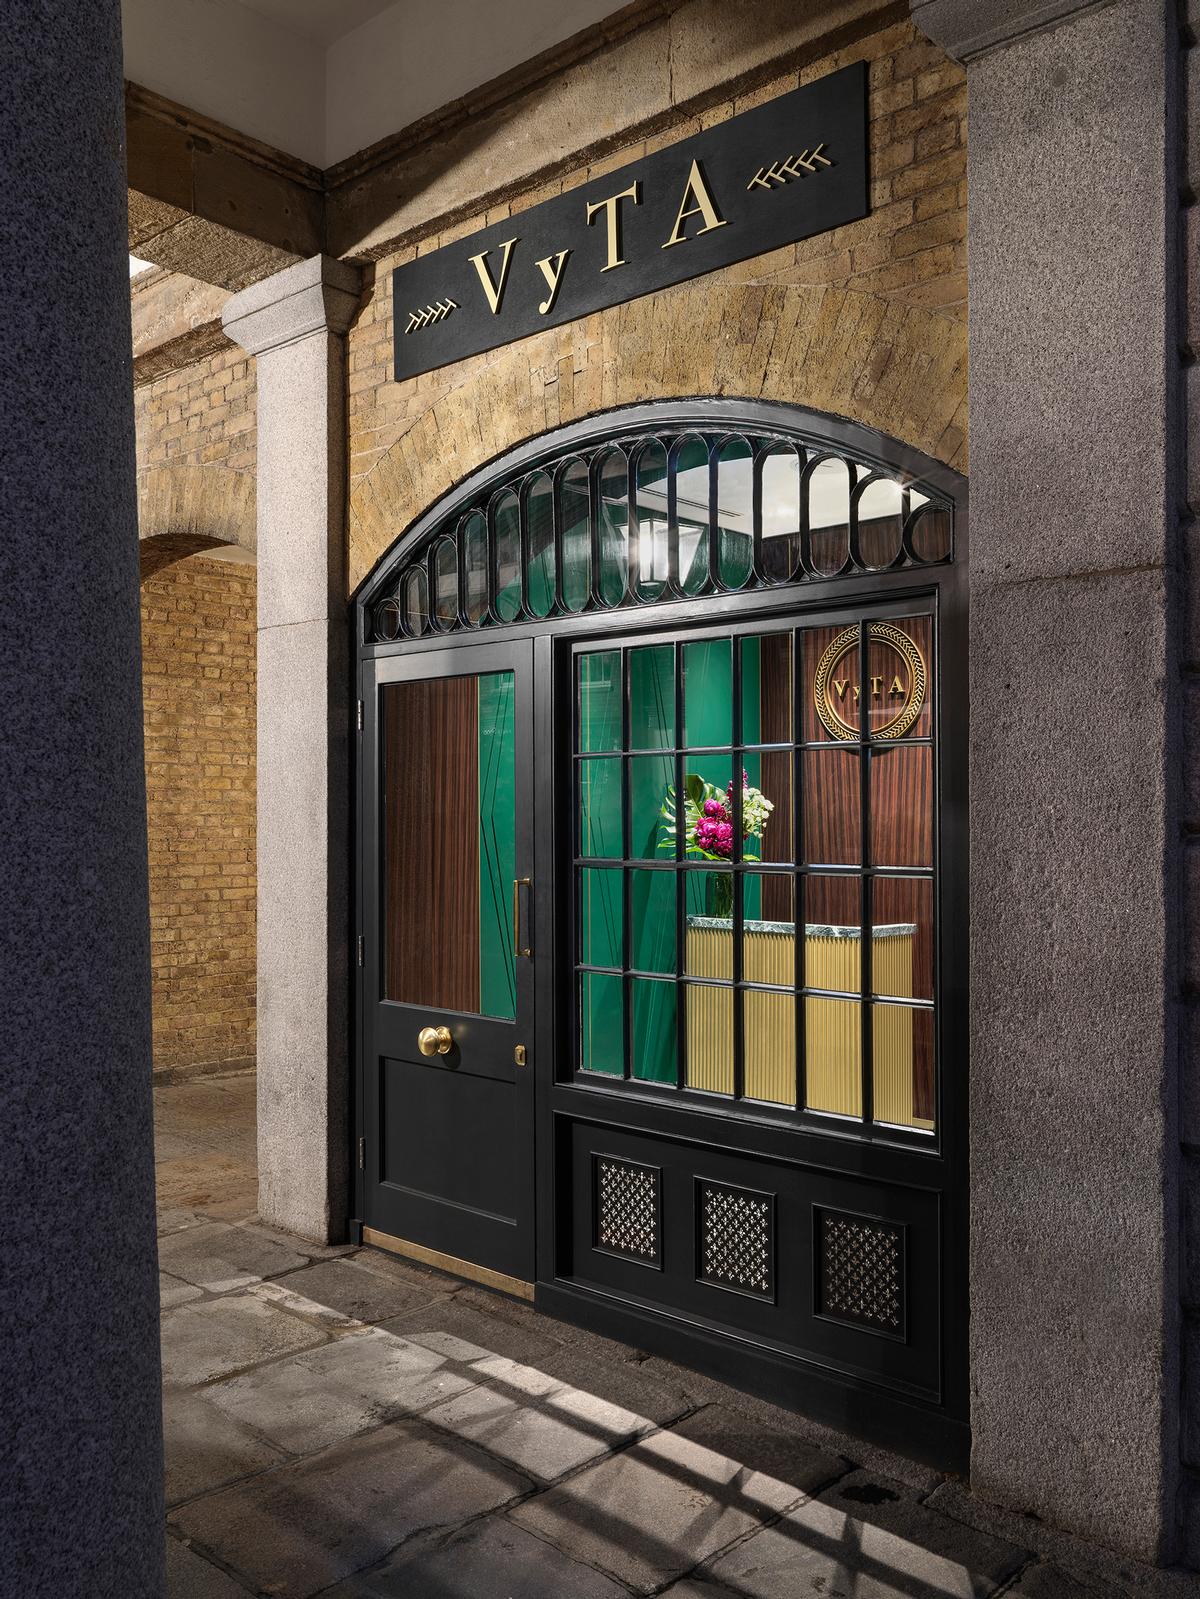 The entrance to the restaurant is on the ground level of Covent Garden Market / Matteo Piazza